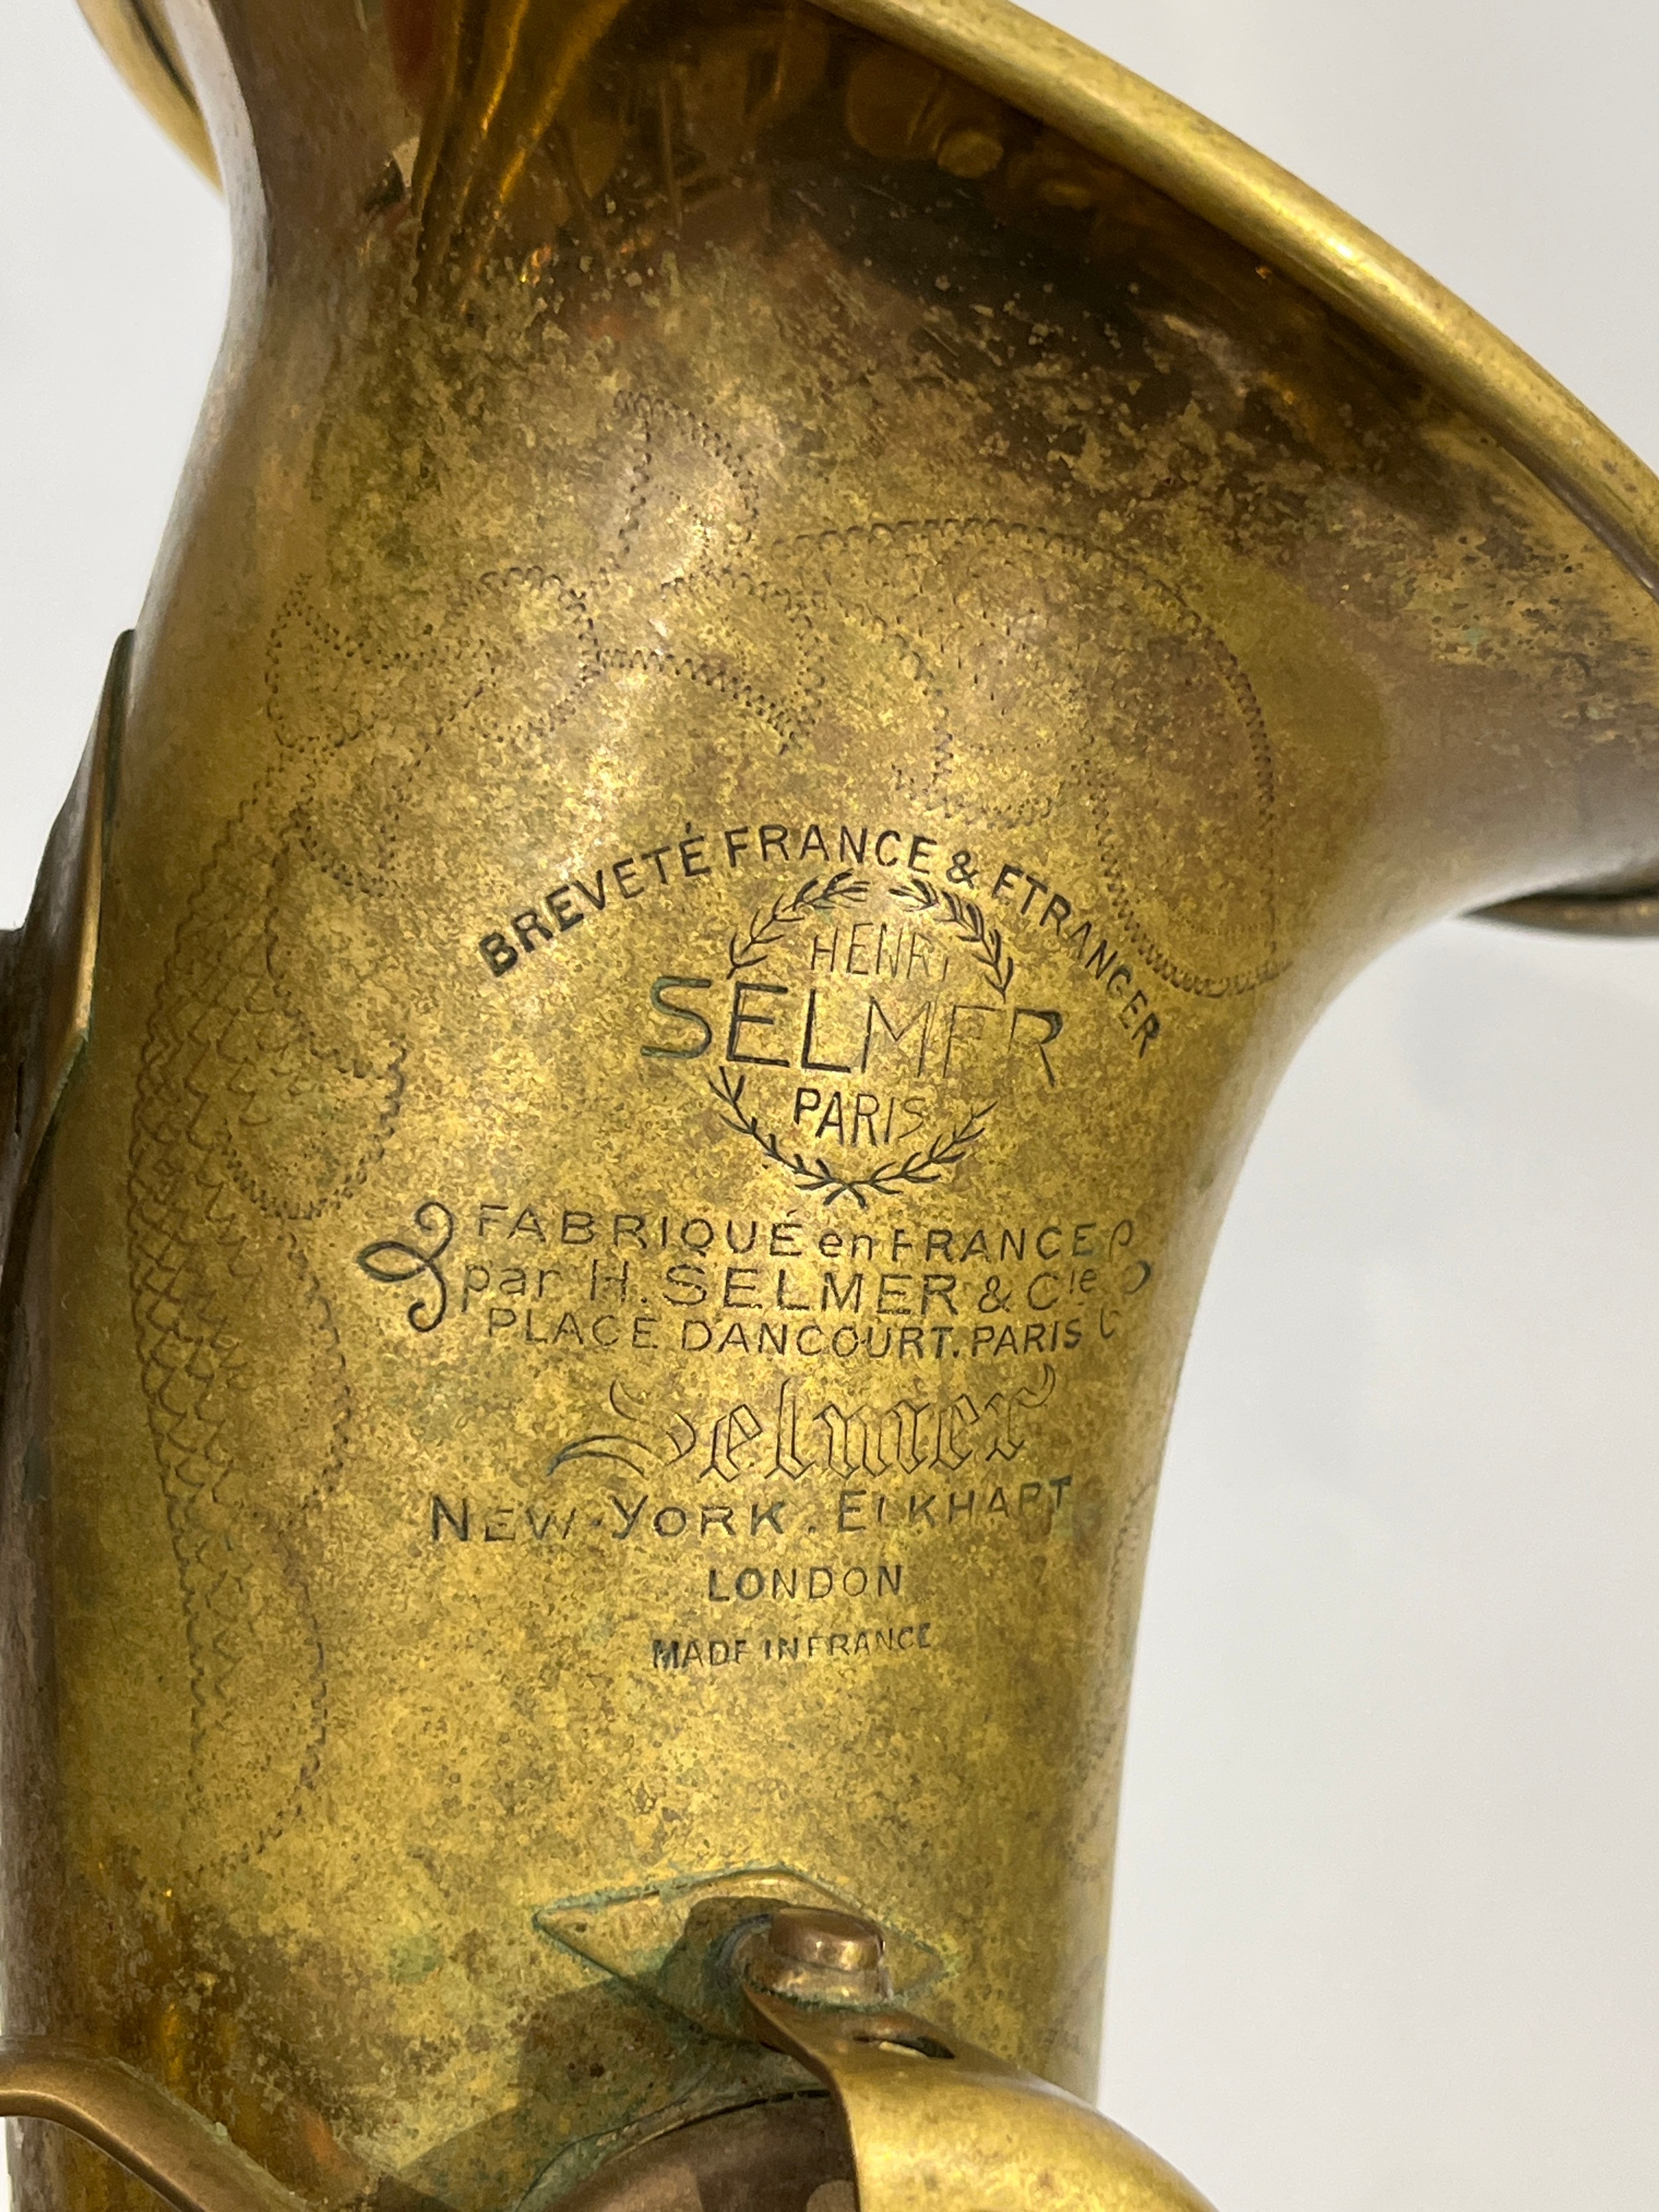 A 1955 Selmer Super Action alto saxophone serial no. M61153, hard cased - Image 3 of 4